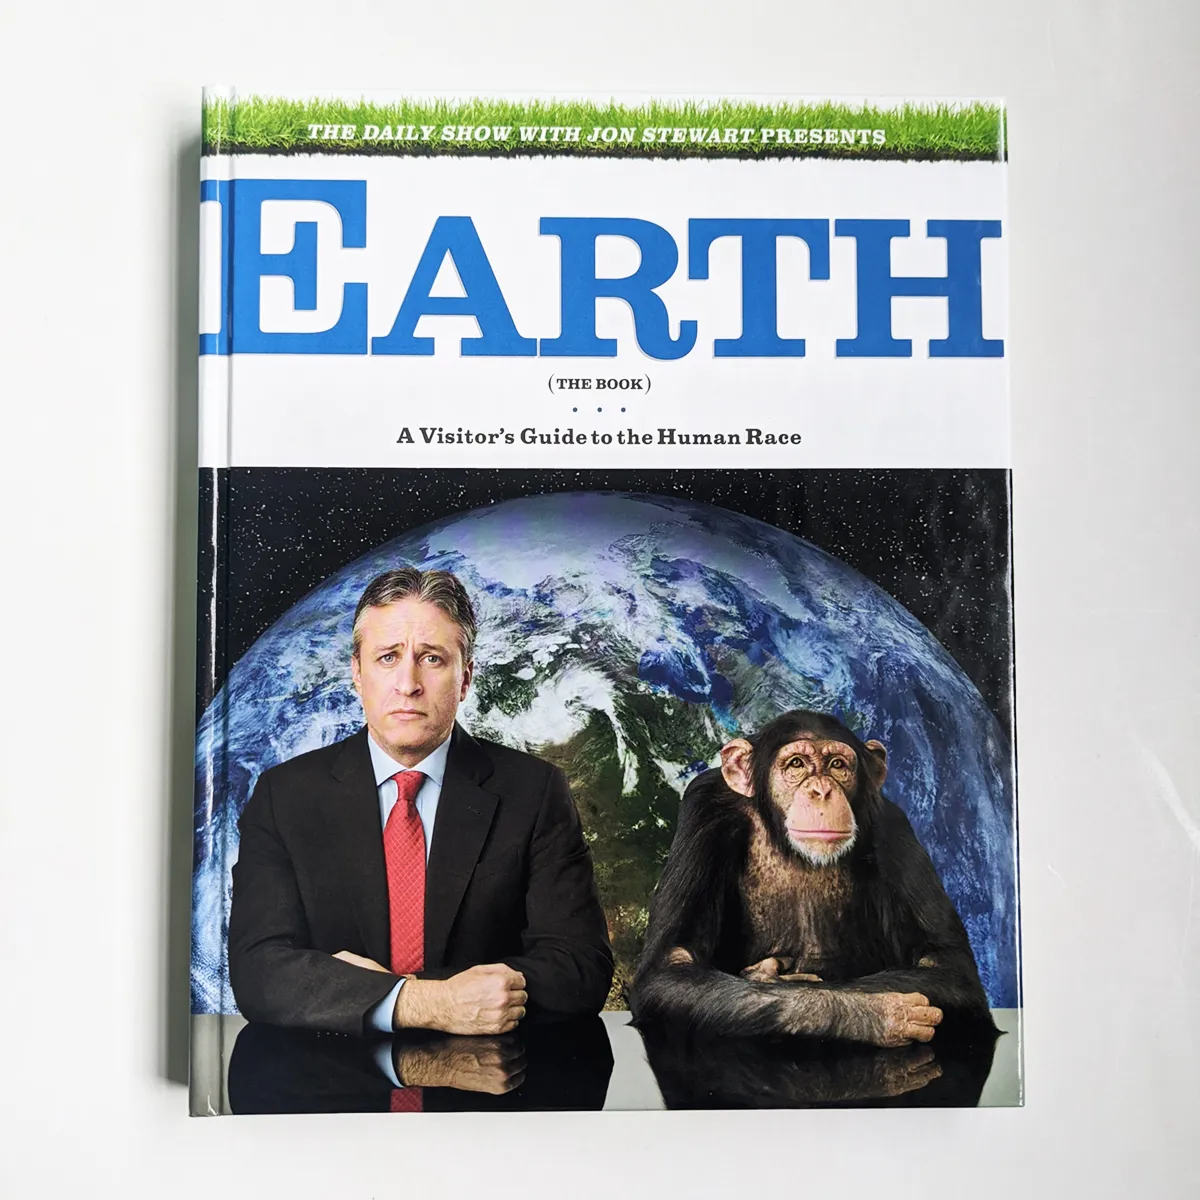 The Daily Show "Earth" Book photo 1